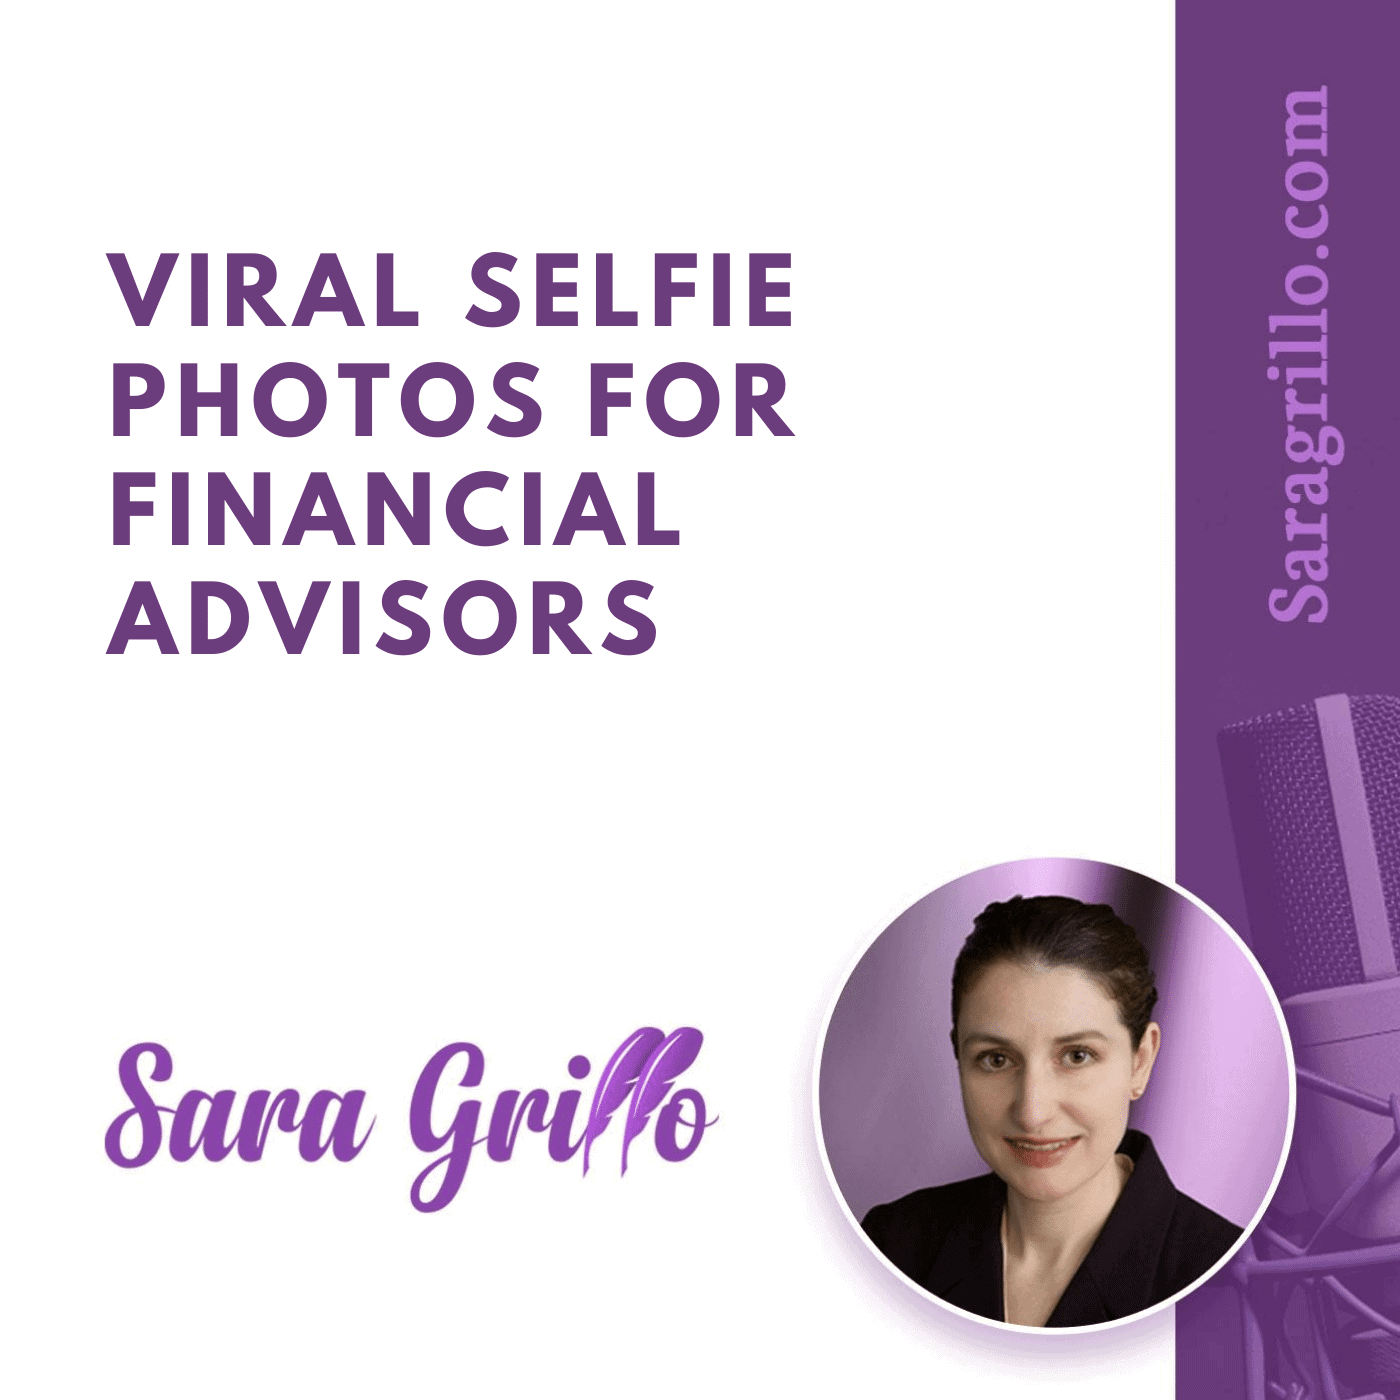 In this podcast we discuss financial advisor selfie photos.